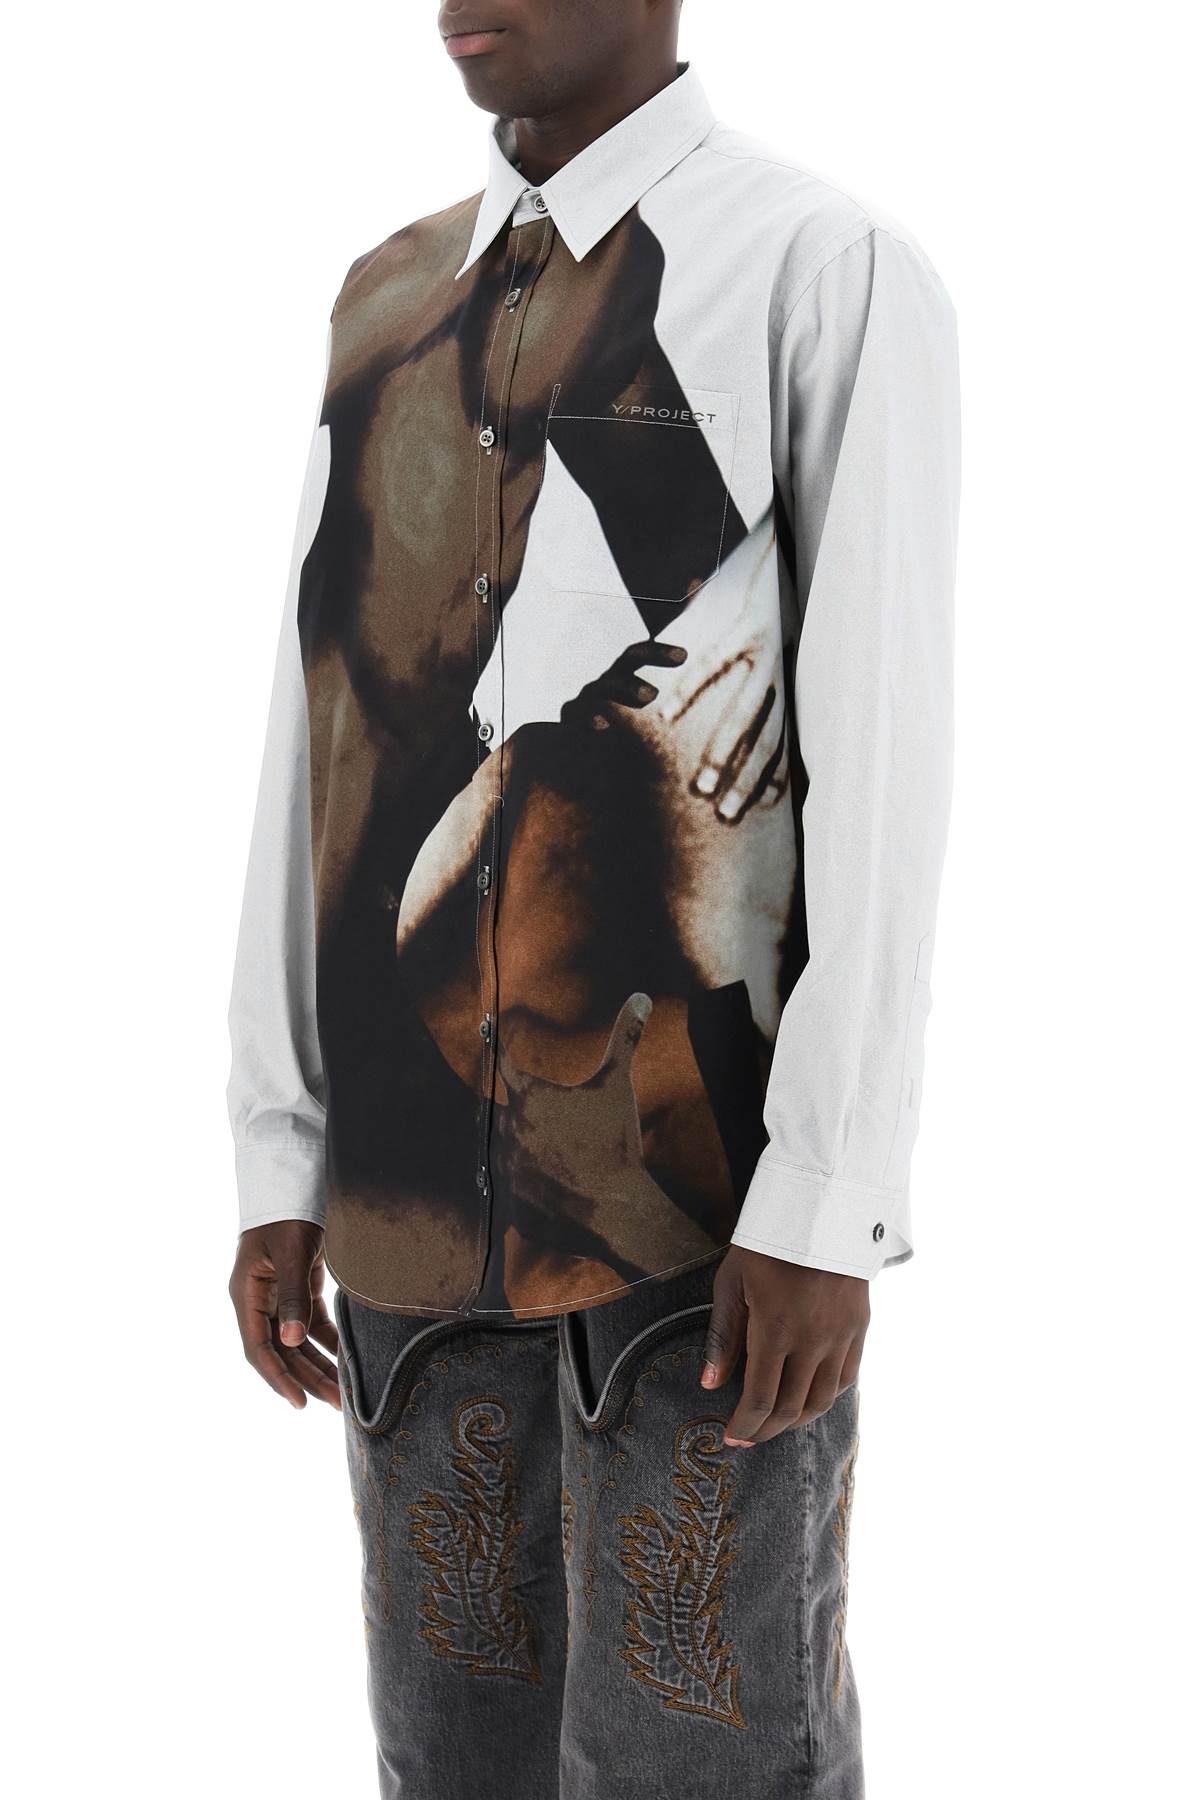 Y Project Y project body collage shirt